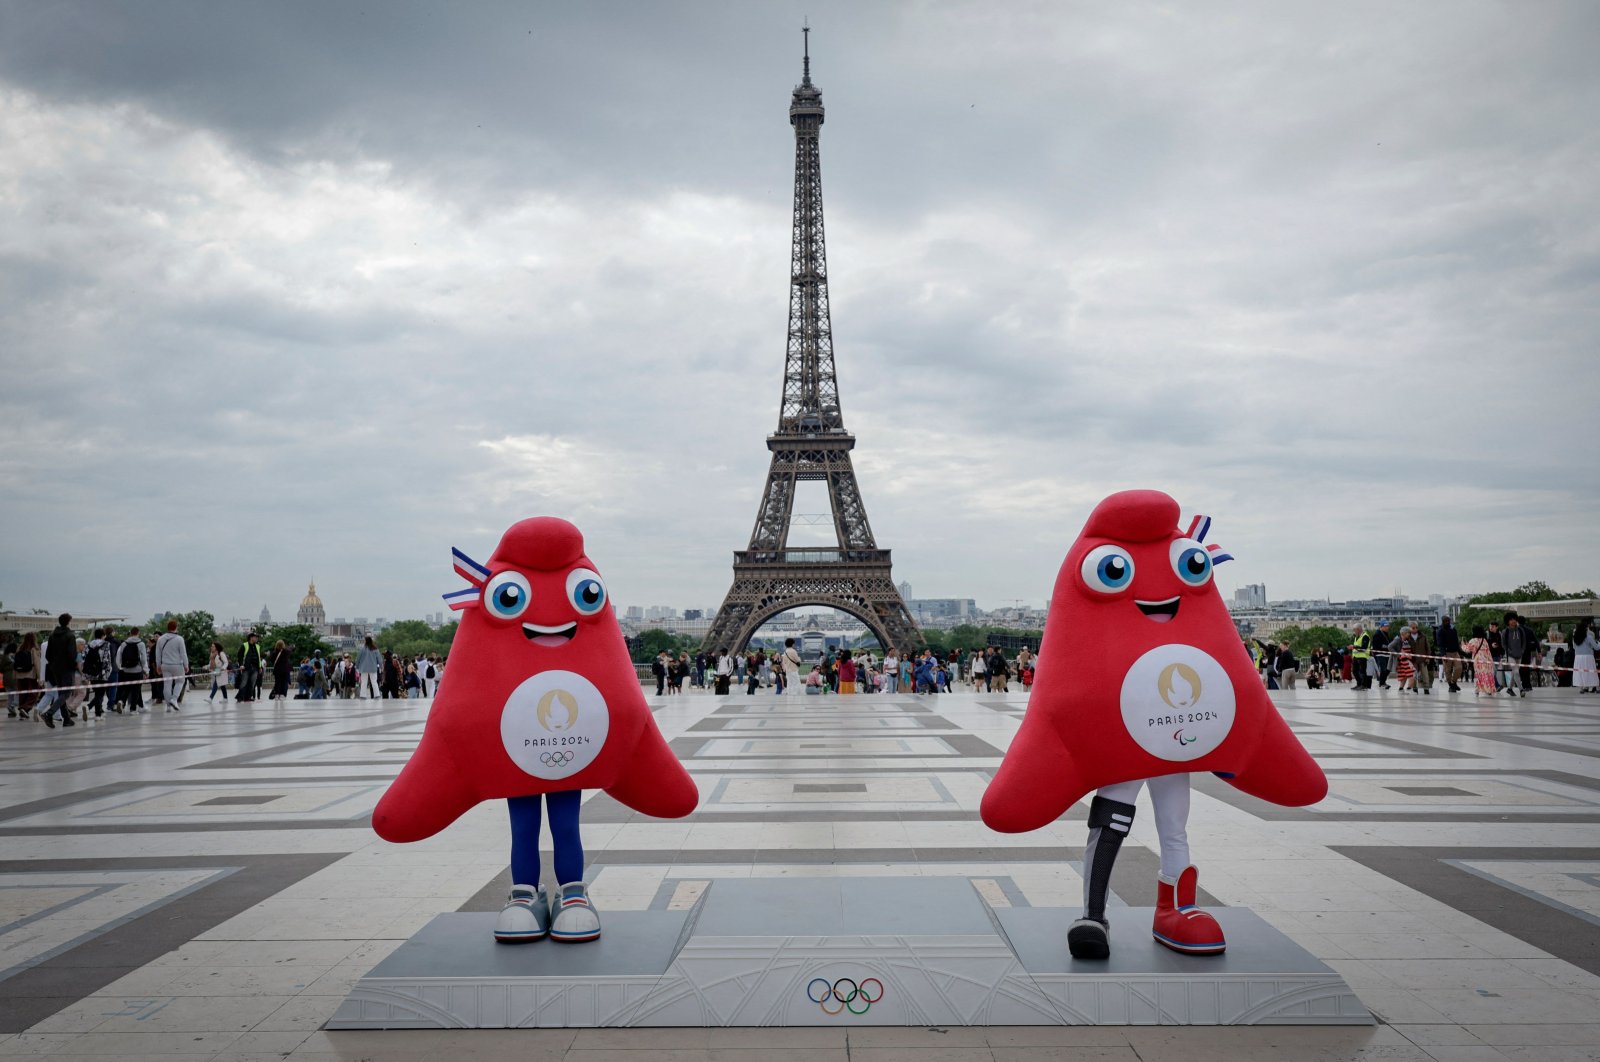 Paris 2024 Olympics (L) and Paralympics mascots "the Phryges" pose during a presentation to the press of the Paris 2024 podium in front of the Eiffel Tower, Paris, France, May 23, 2024. (AFP Photo)